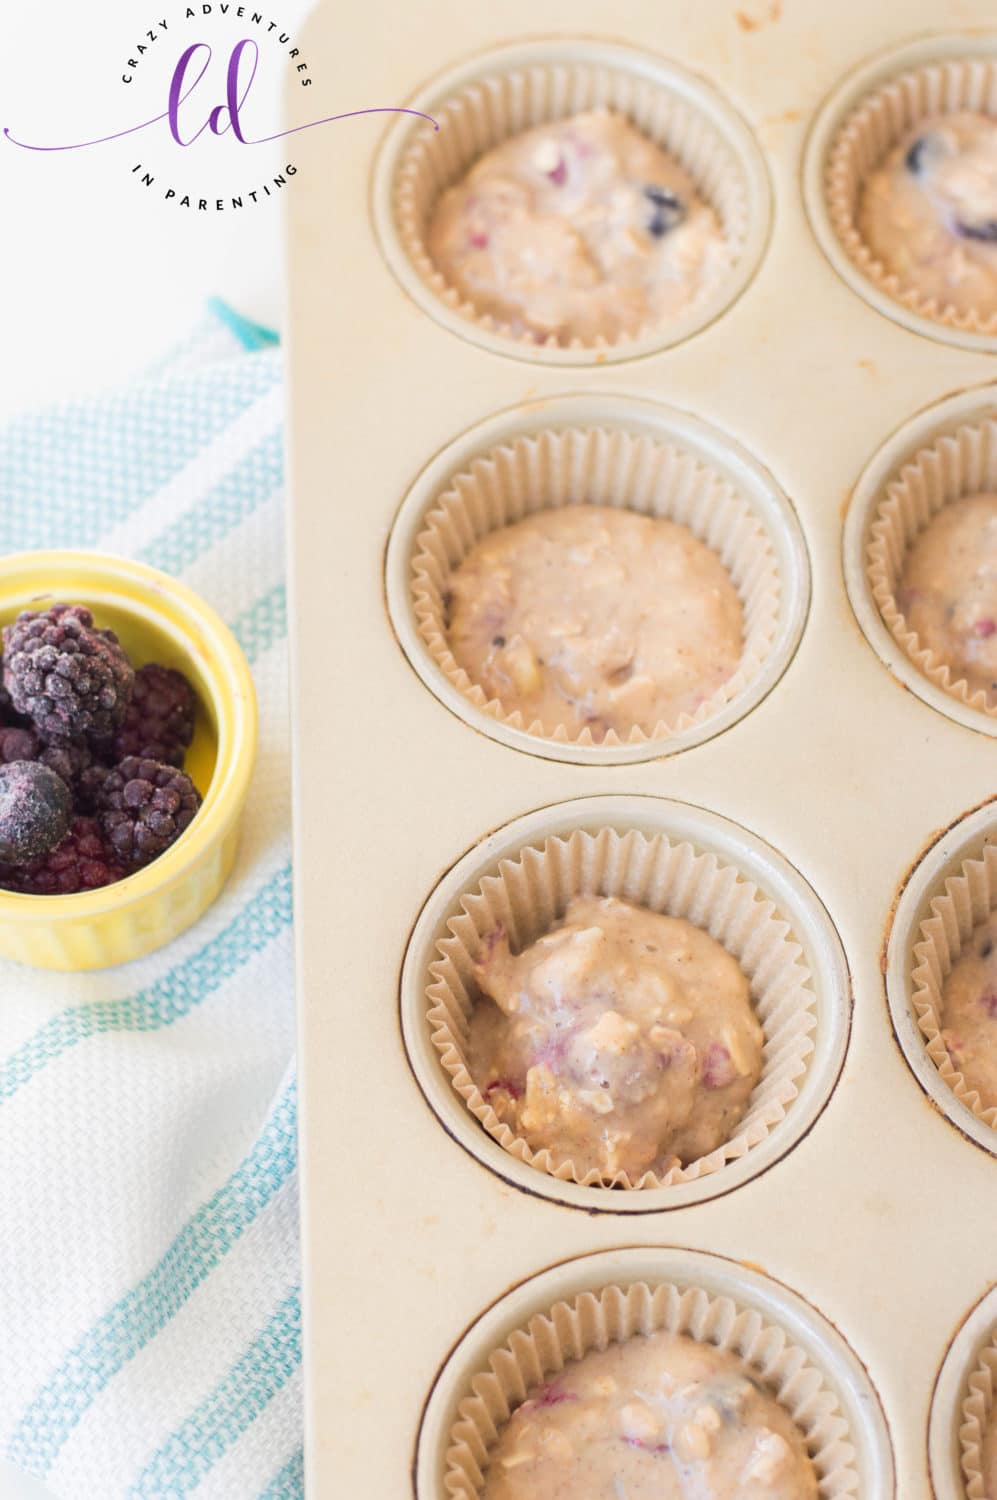 Fill Muffin Cups with Muffin Batter to Prepare Healthy Berry Muffins